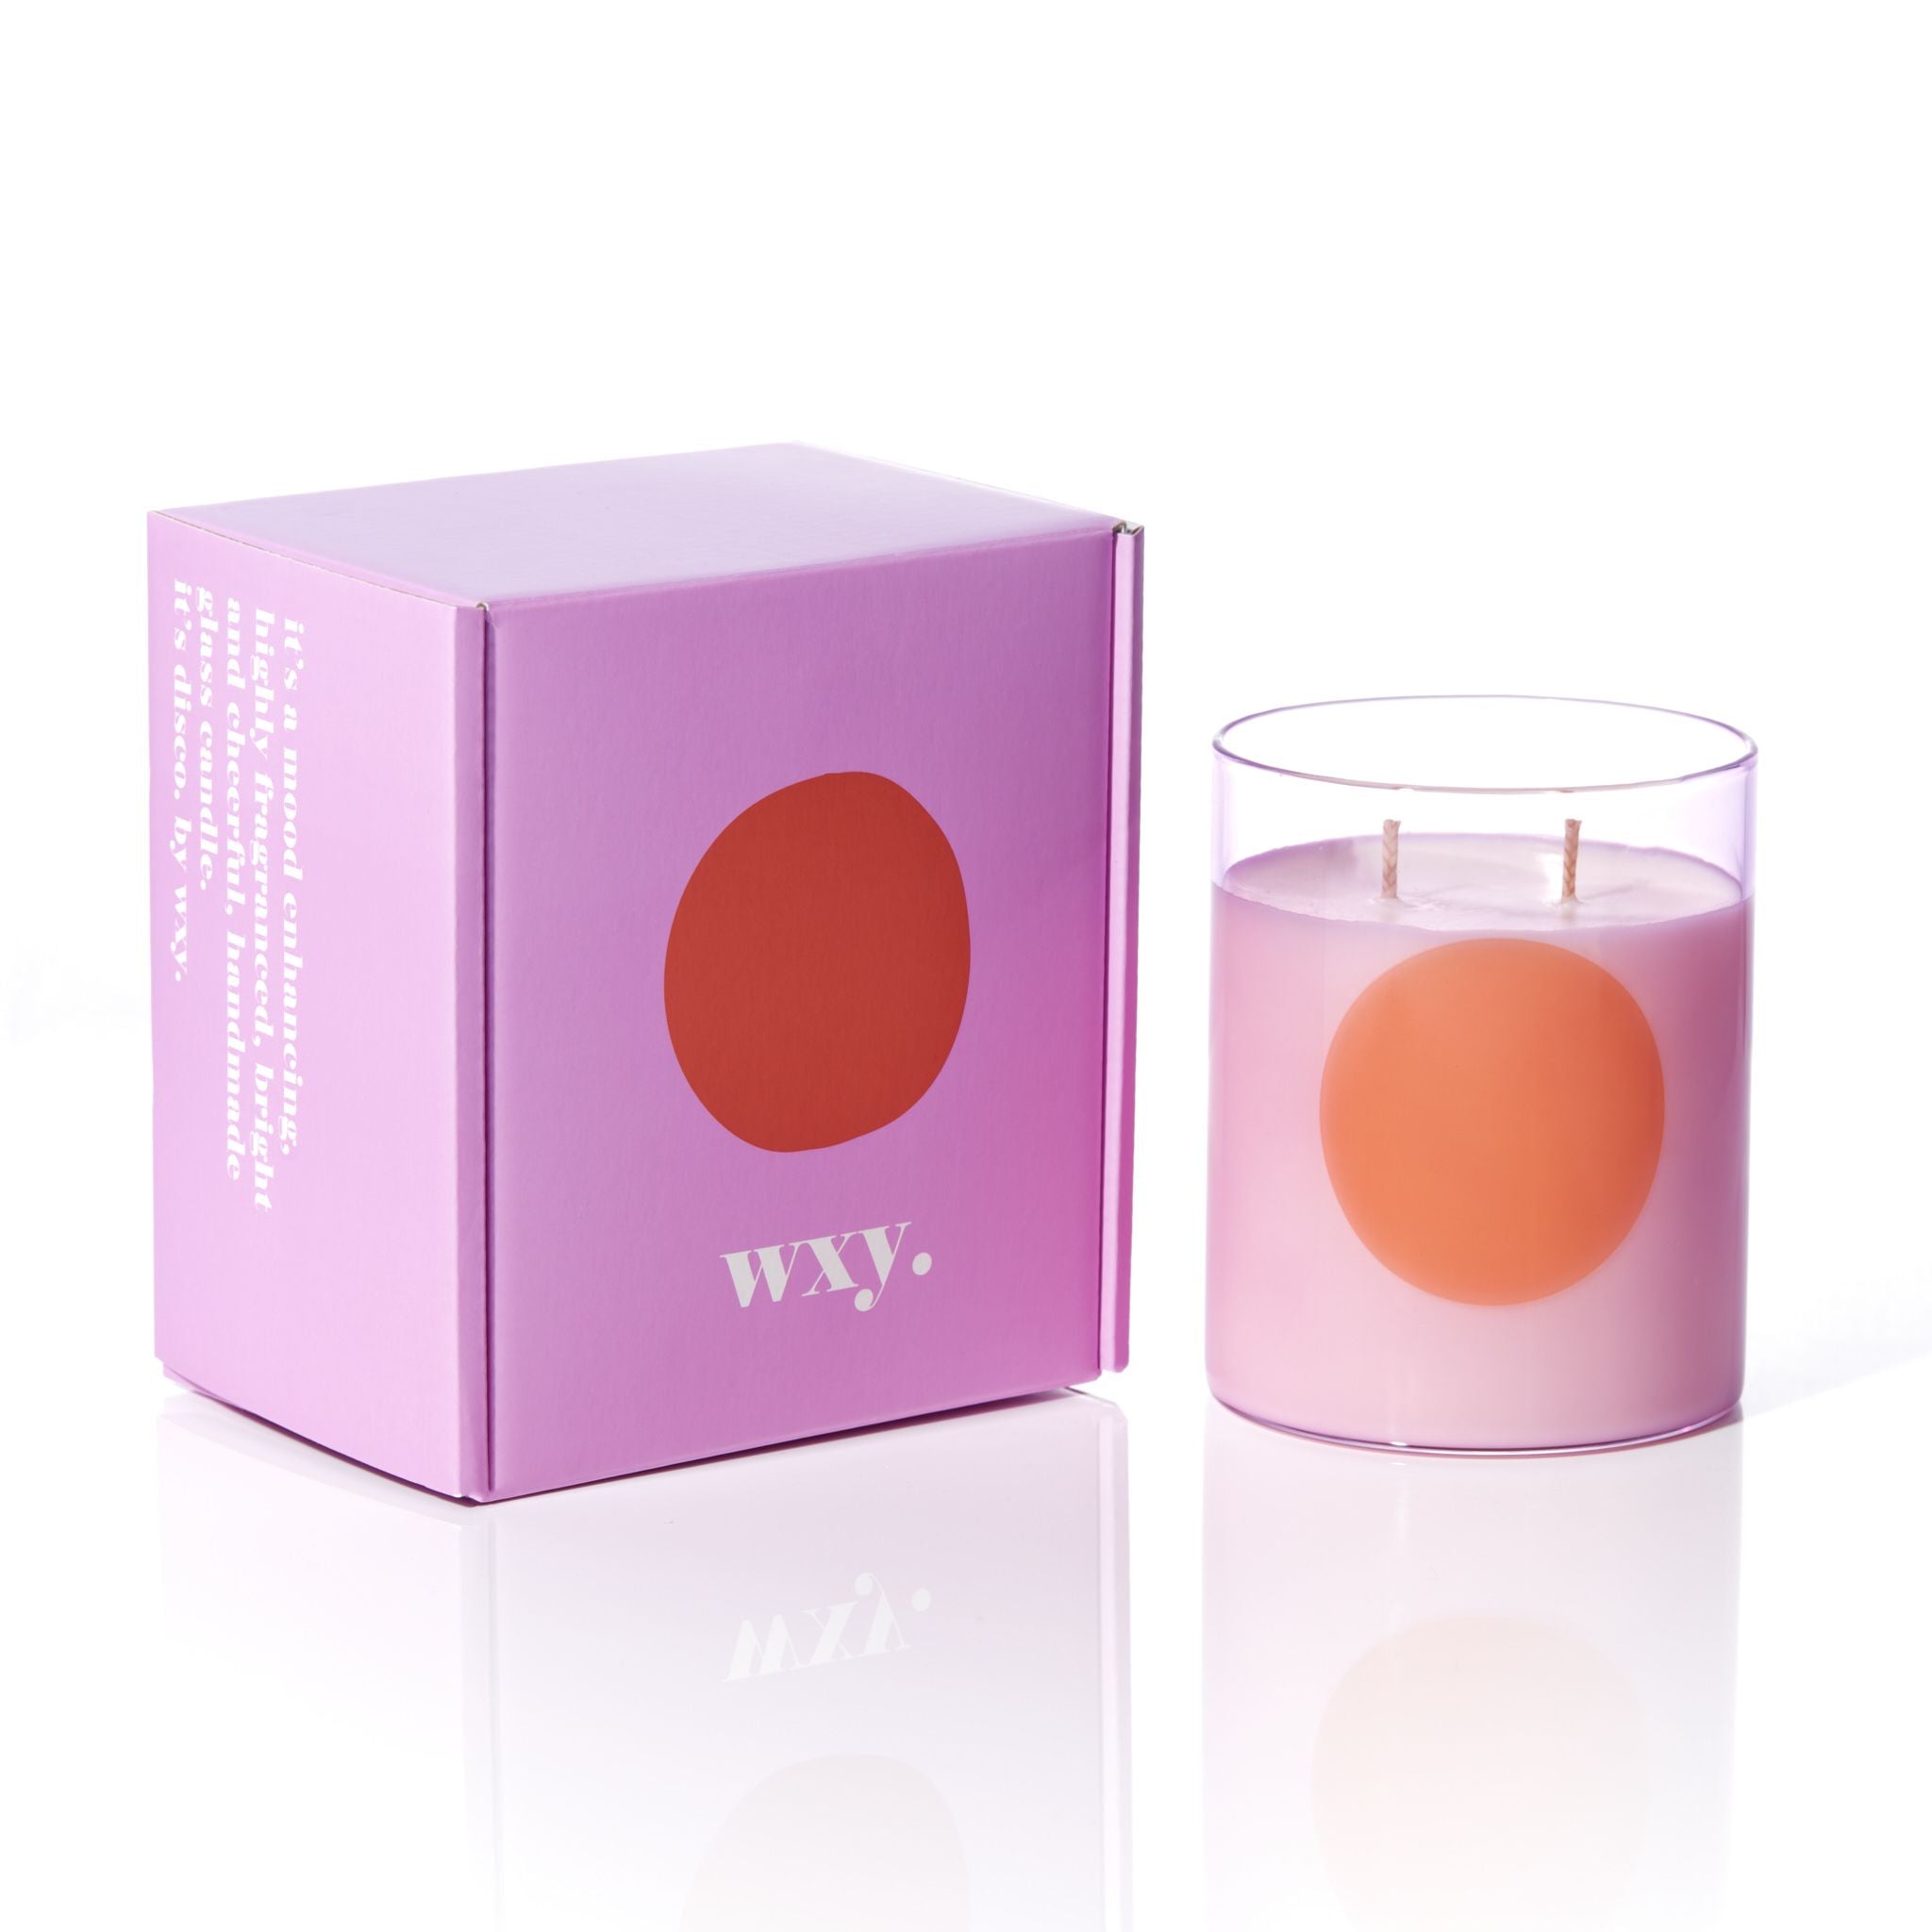 wxy-orris-root-and-amber-disco-candle